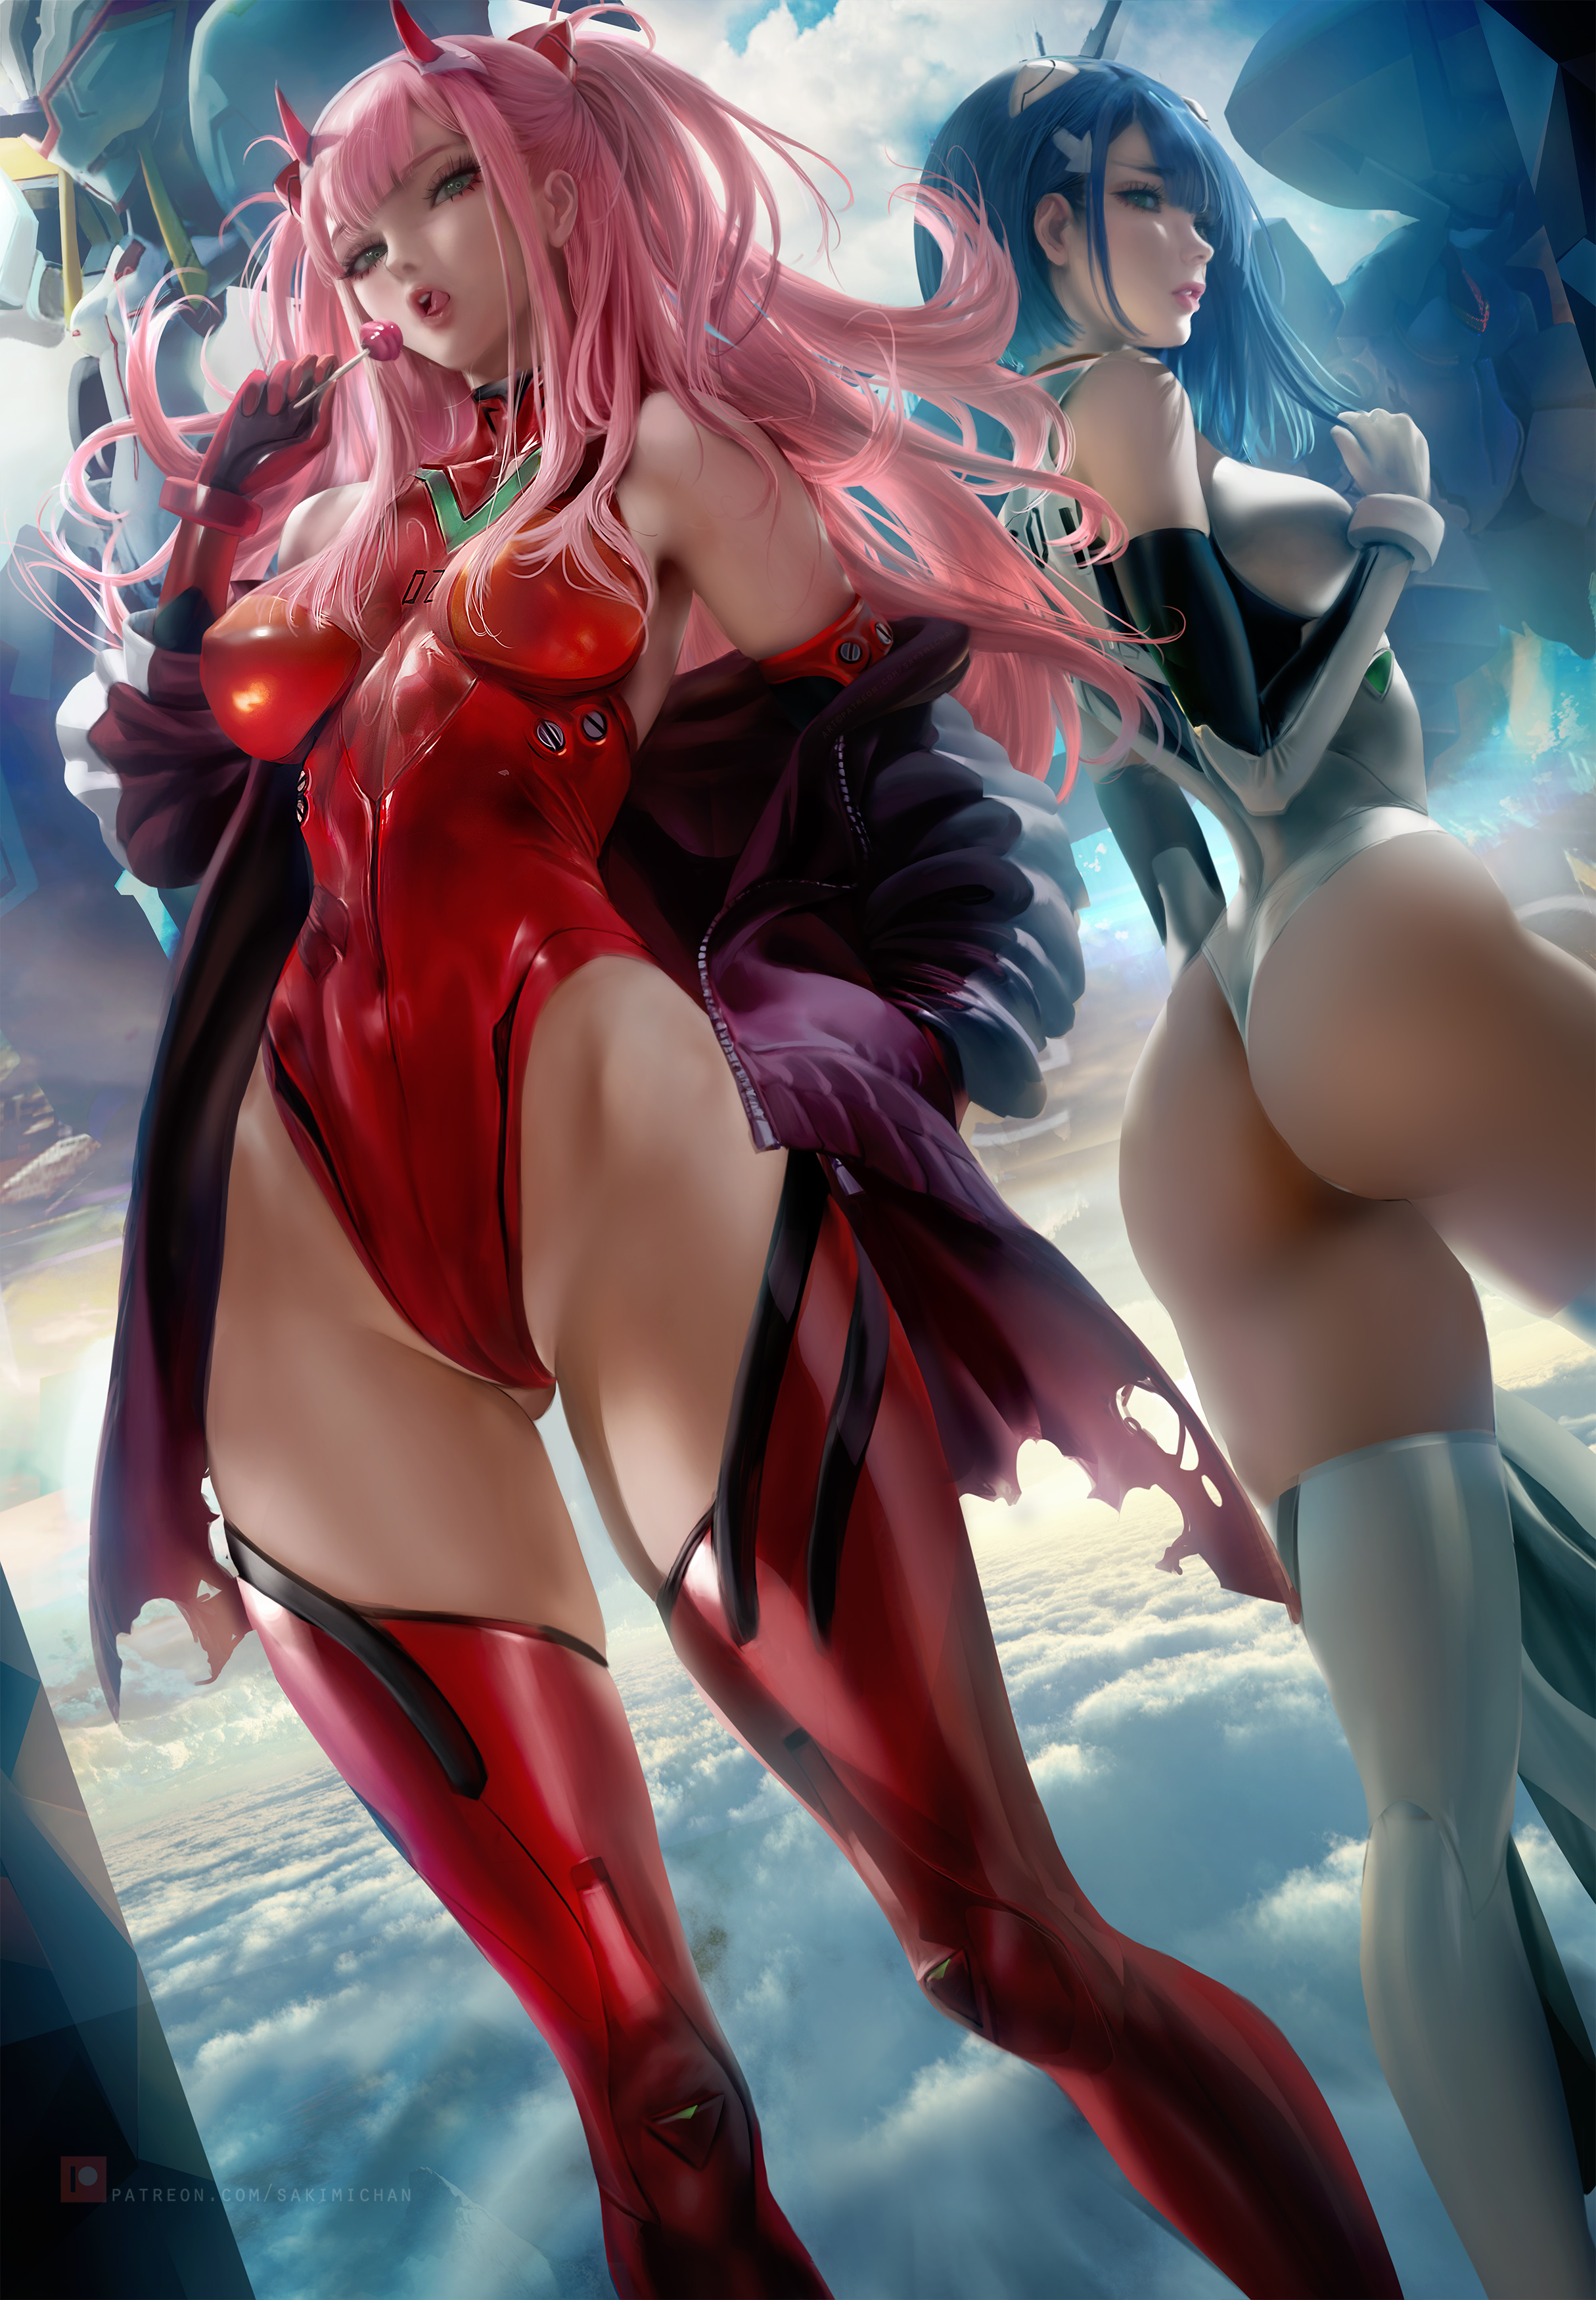 Anime 2429x3500 Zero Two (Darling in the FranXX) Ichigo (Darling in the FranXX) Darling in the FranXX crossover anime girls anime two women fantasy girl looking at viewer looking over shoulder horns pink hair long hair blue hair short hair tongue out lollipop plugsuit the gap ass thigh-highs gloves open clothes jacket mechs clouds artwork digital art drawing fan art Sakimichan ecchi low-angle mecha girls